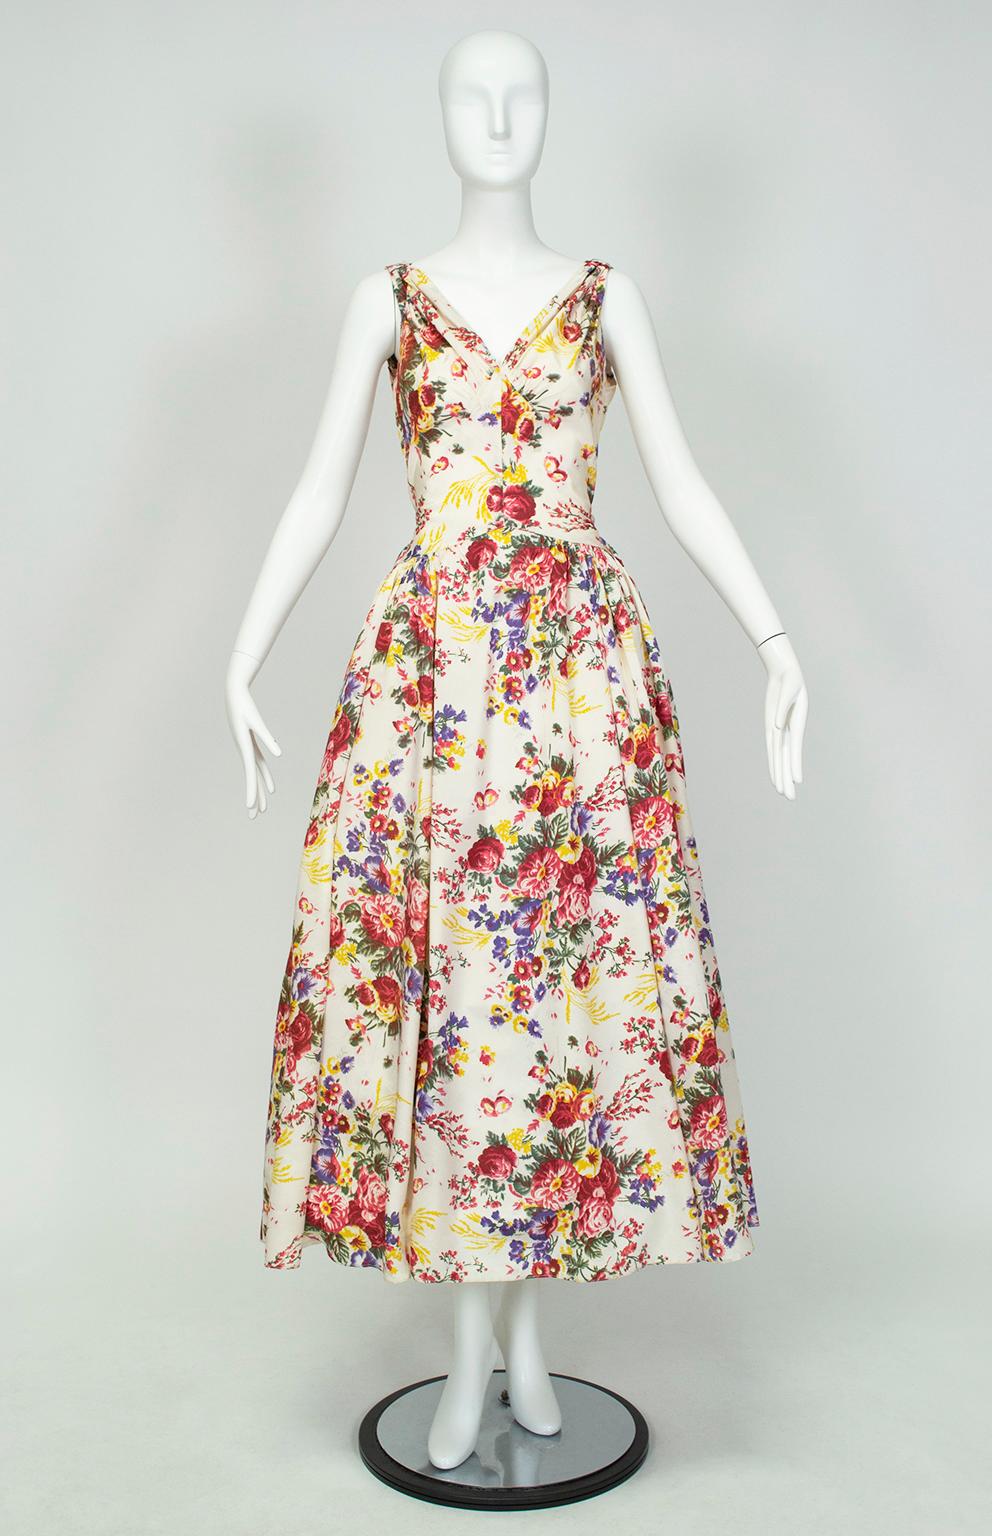 With a neckline worthy of Ava Gardner, this dress begs to be worn to an outdoor wedding, seaside picnic or Easter brunch. Its girlish, feminine print is perfectly offset by an alluring plunge bodice and rustling ankle-length skirt. A dead ringer for